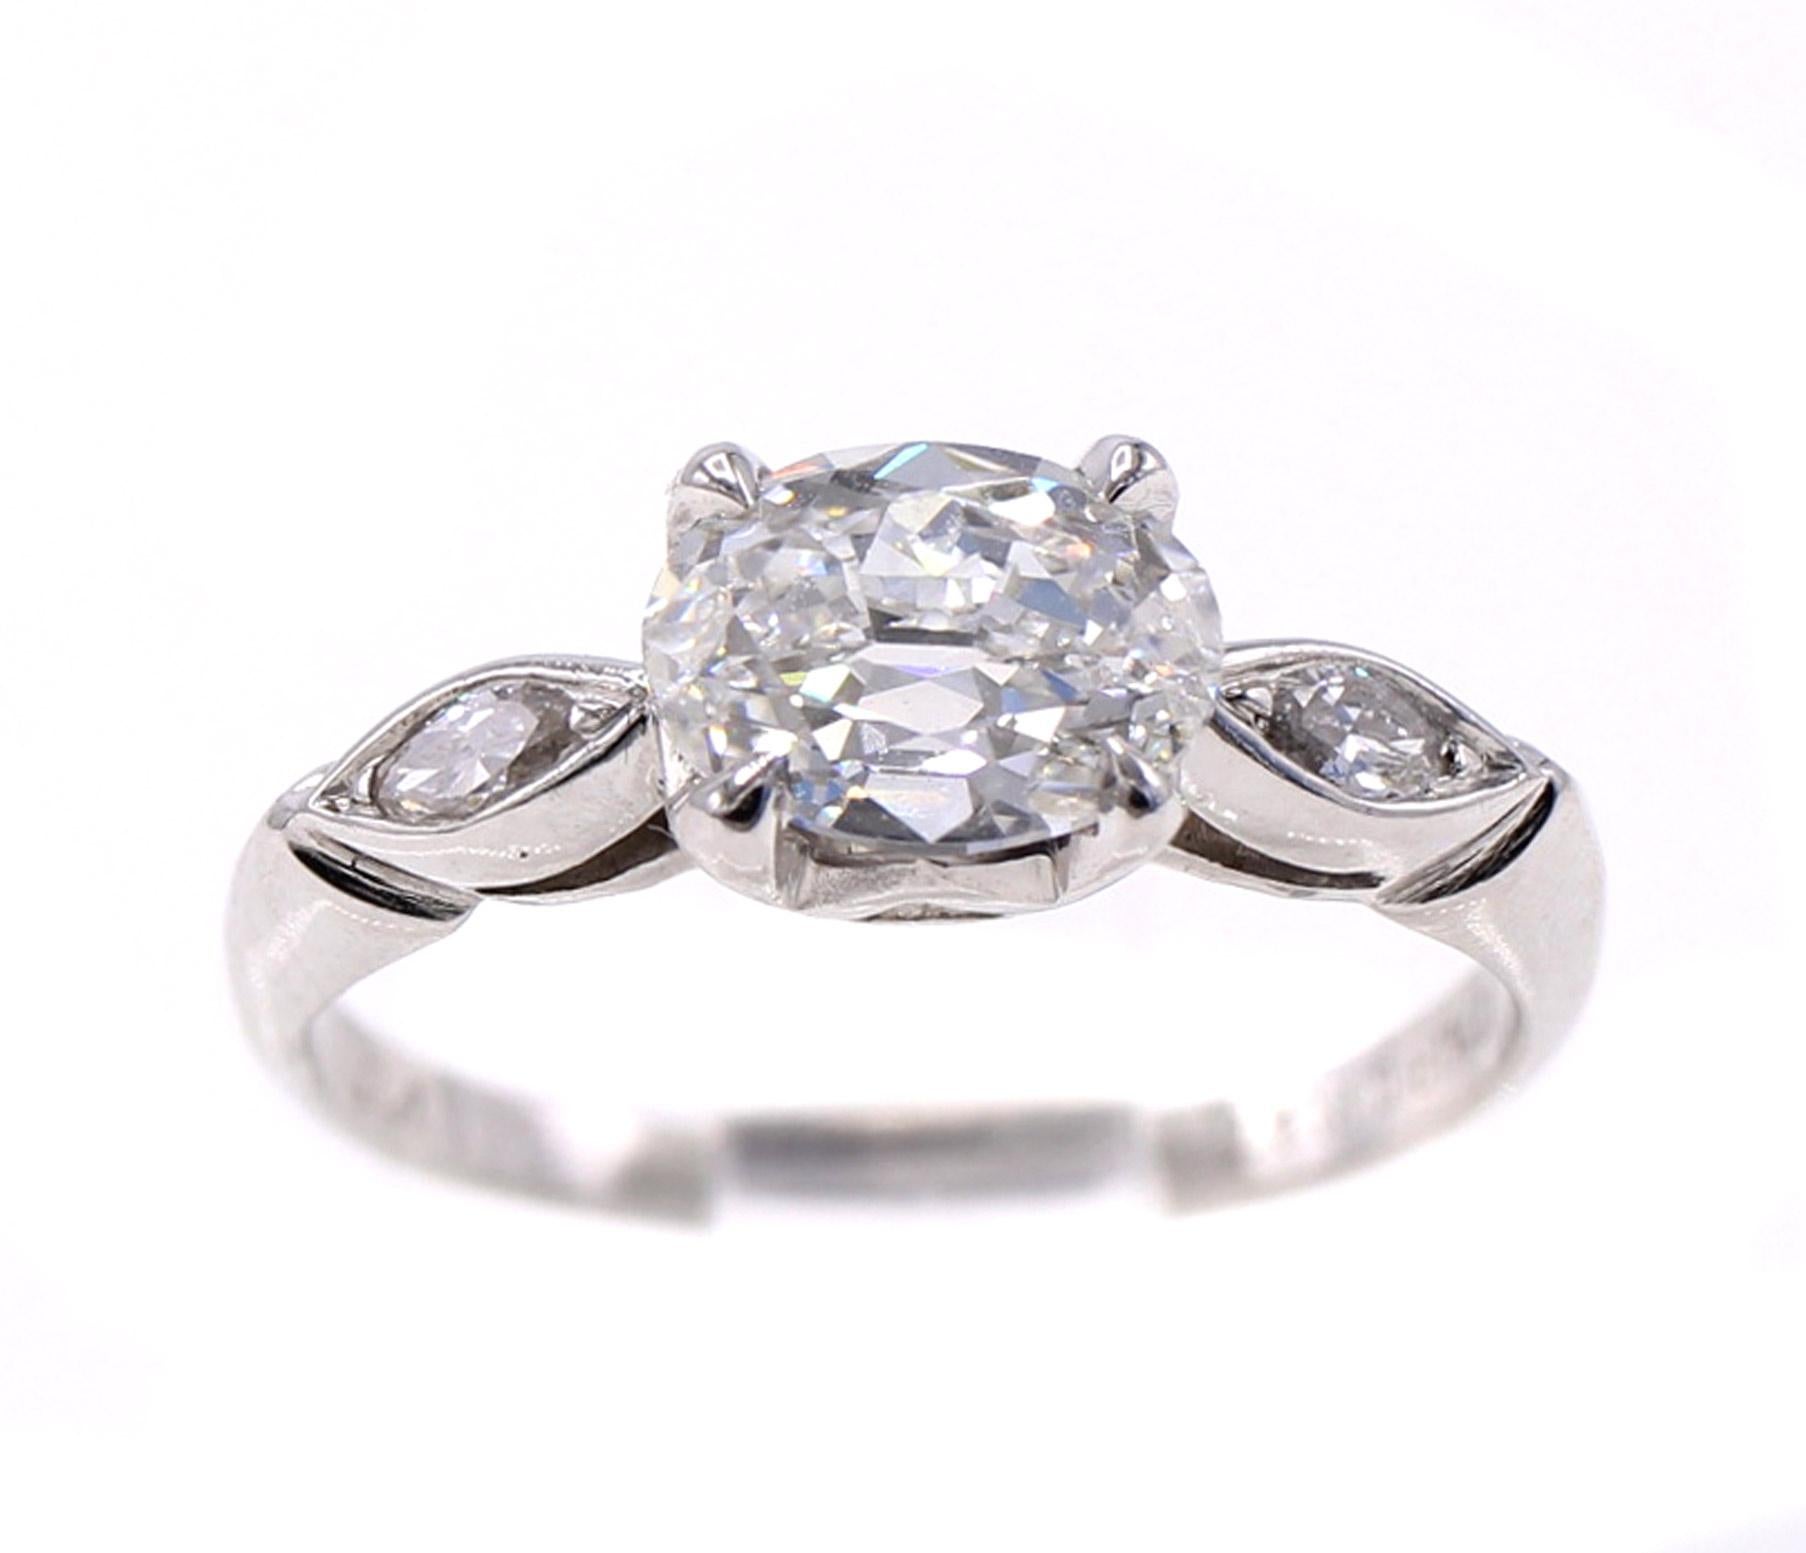 The centerpiece of this well handcrafted contemporary mounting is a beautiful antique cut oval diamond weighing 1.01 carats accompanied by a report from the GIA grading the color as F and the clarity as VVS2. The interesting combination of 2 periods